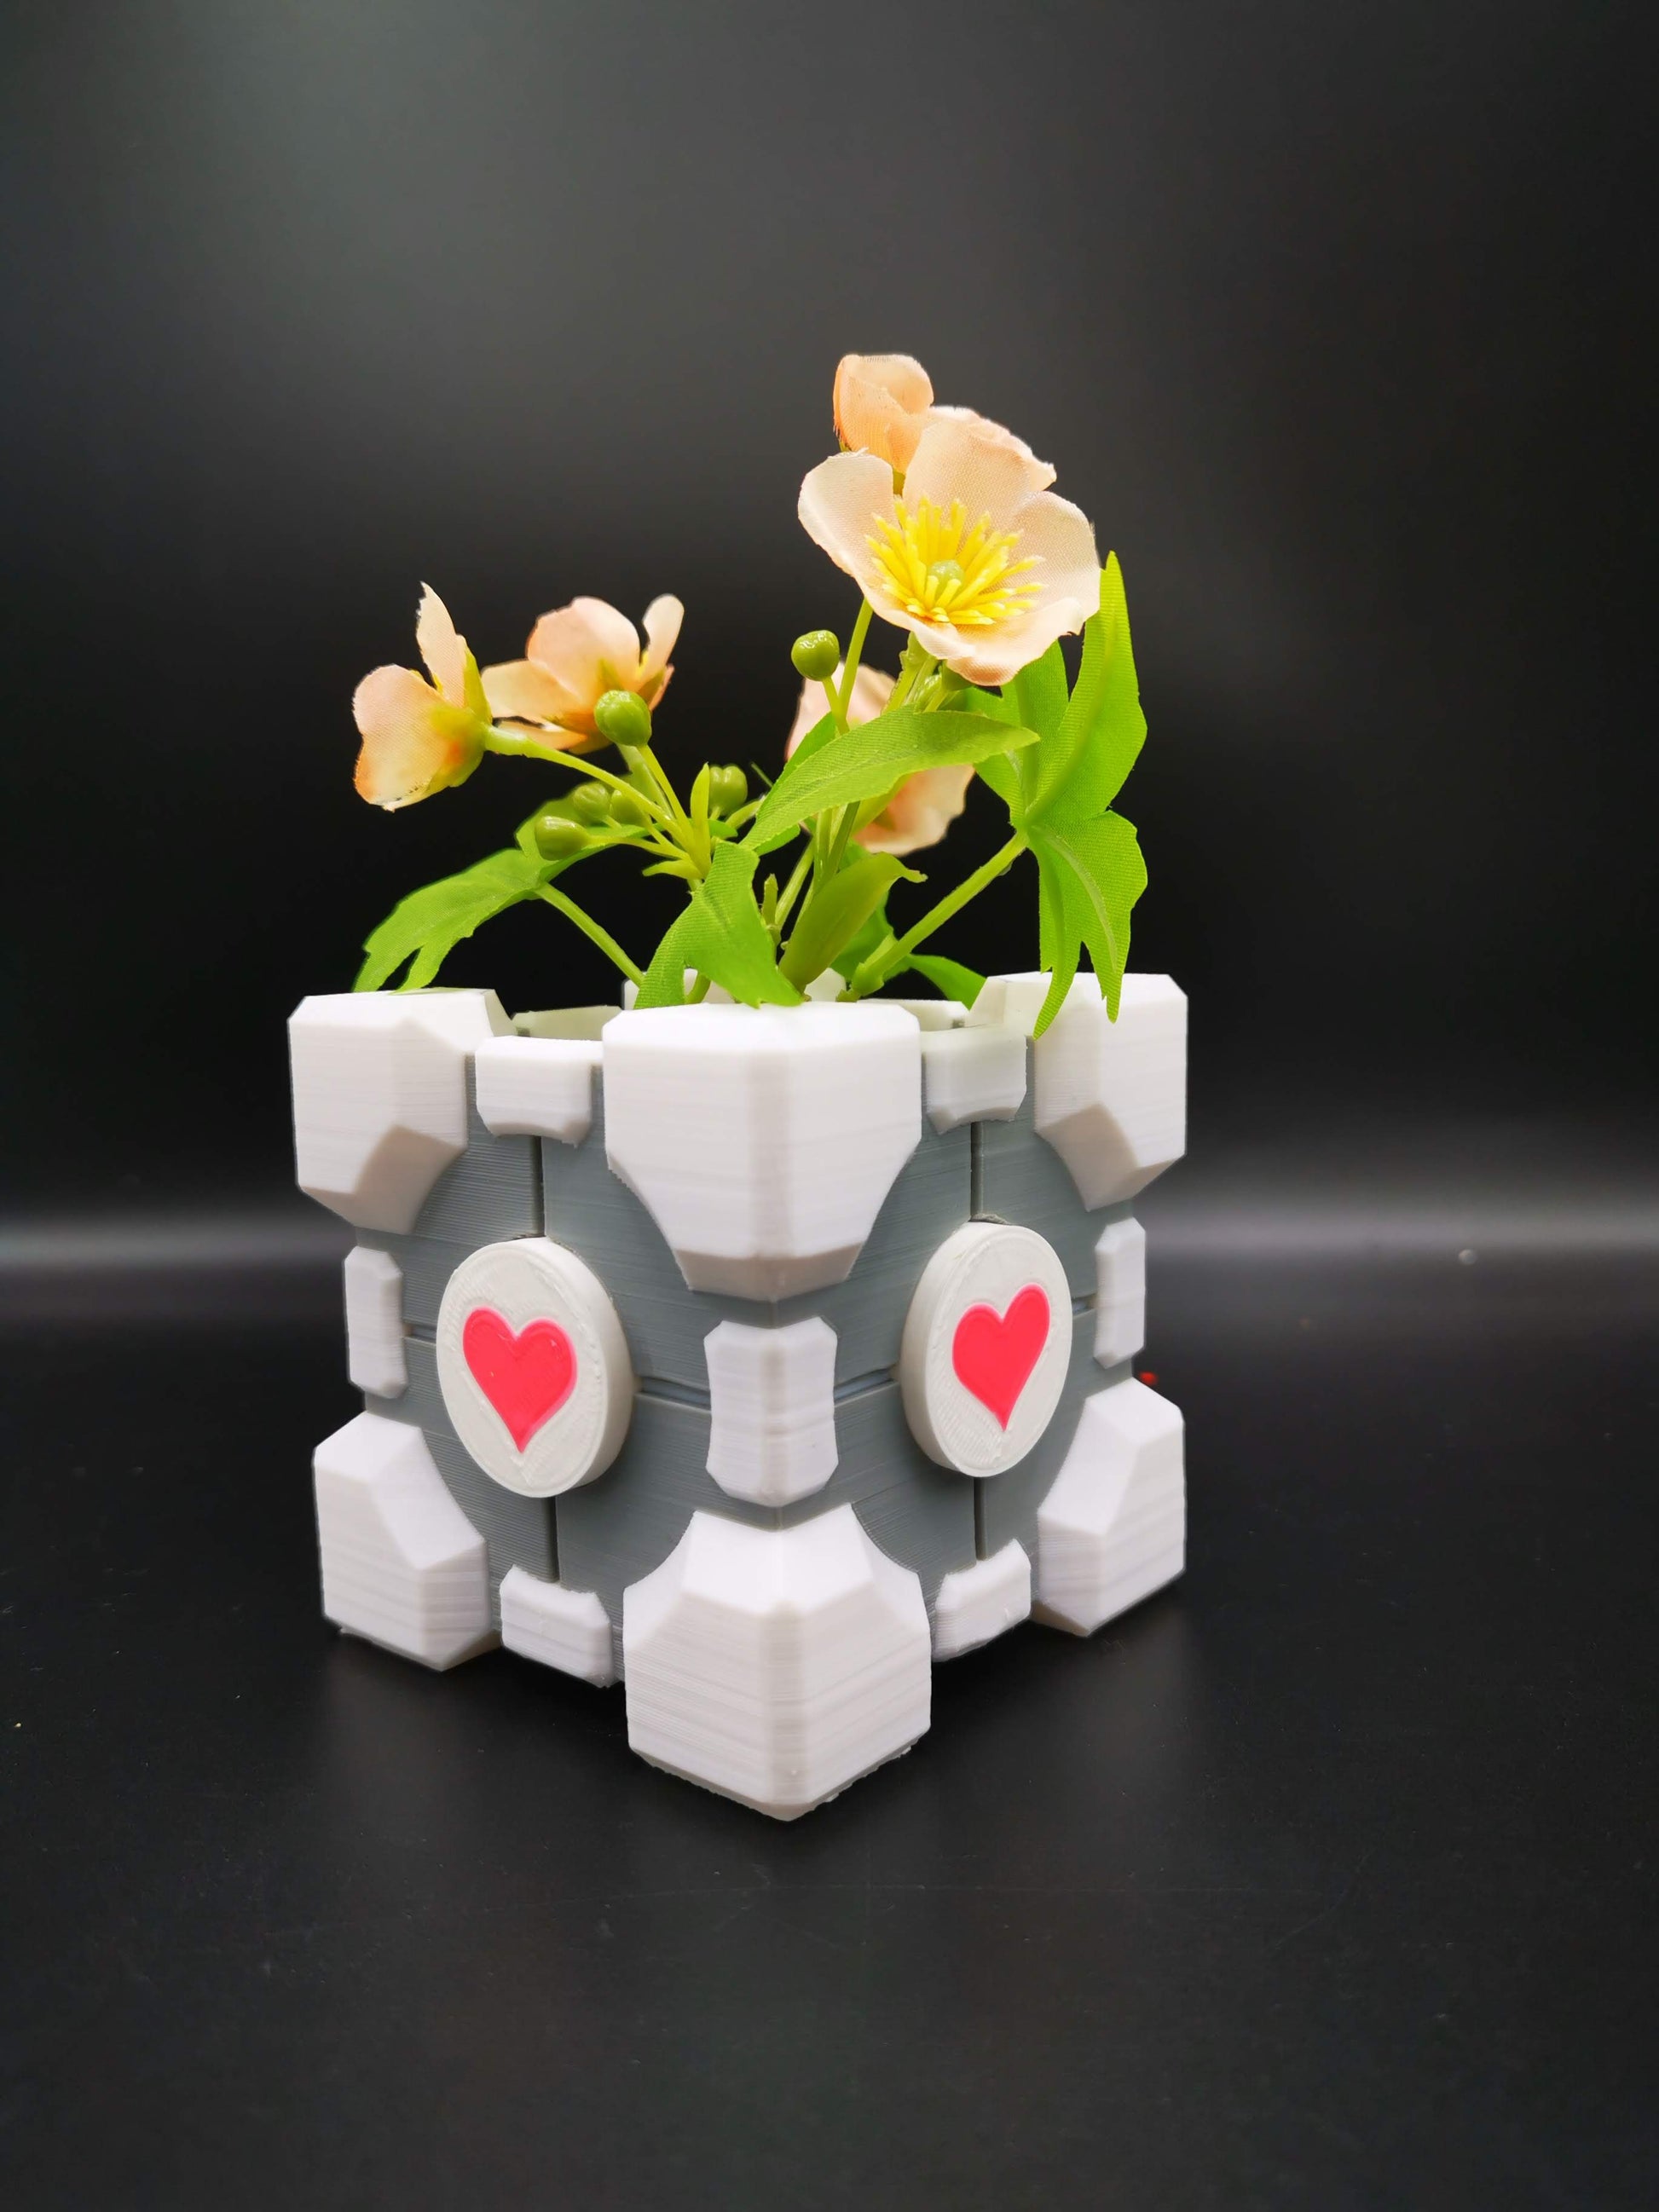 Companion Cube Portal planter close up from front side angle with plant